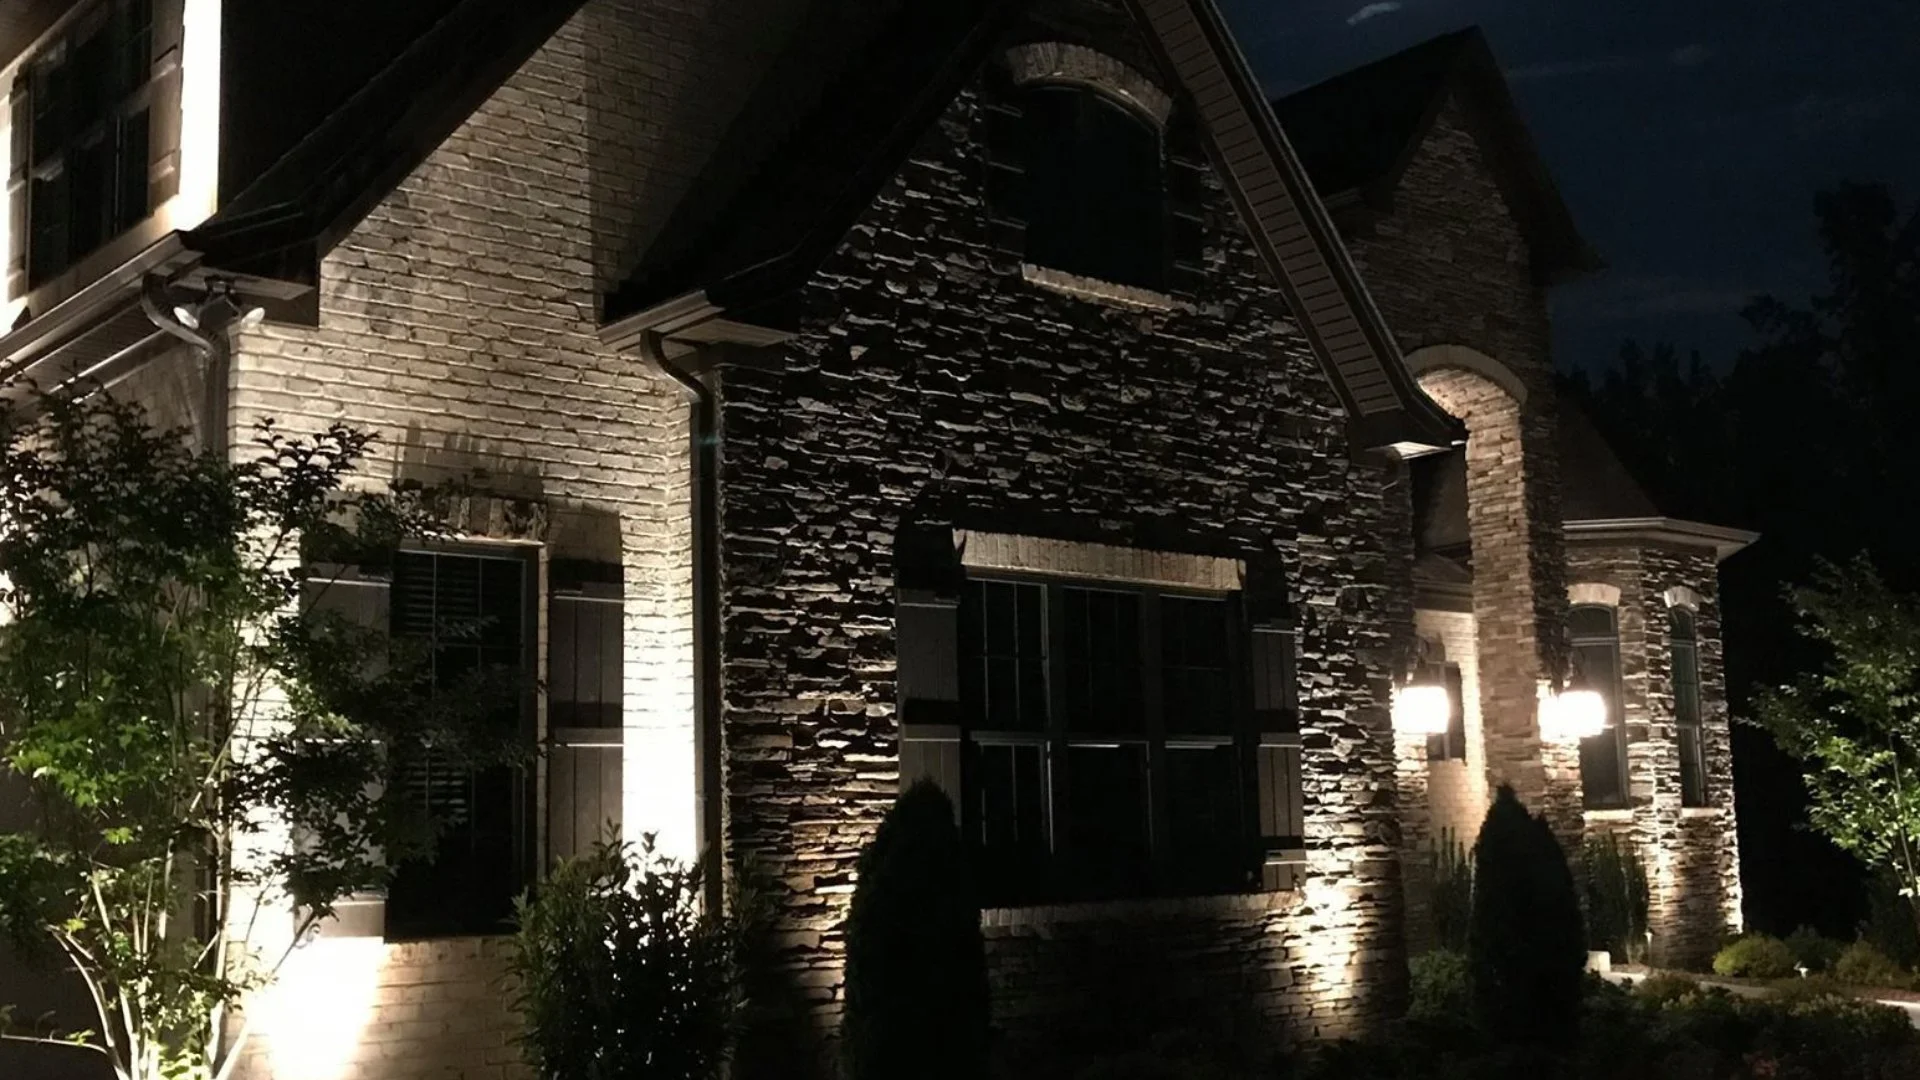 4 Outdoor Lighting Techniques to Consider Incorporating on Your Property